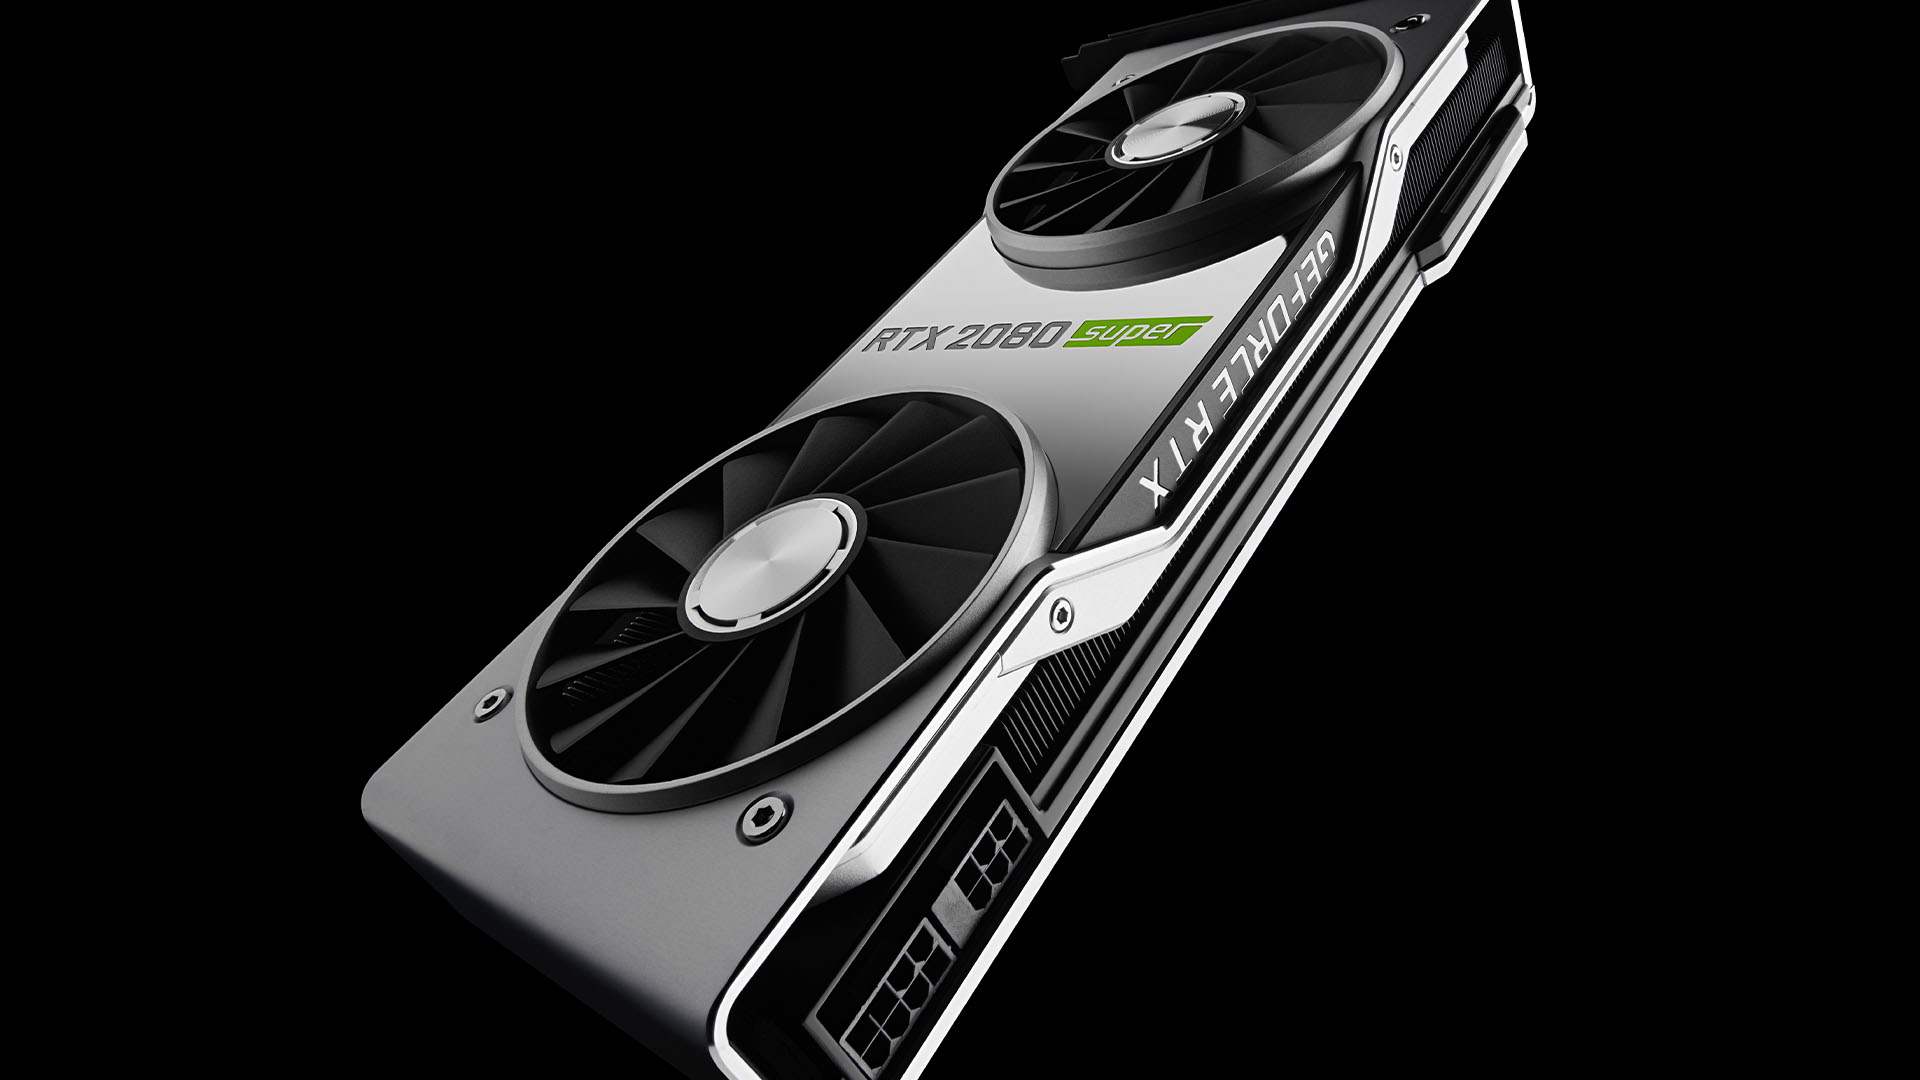 Nvidia GeForce RTX 2080 Super review 04